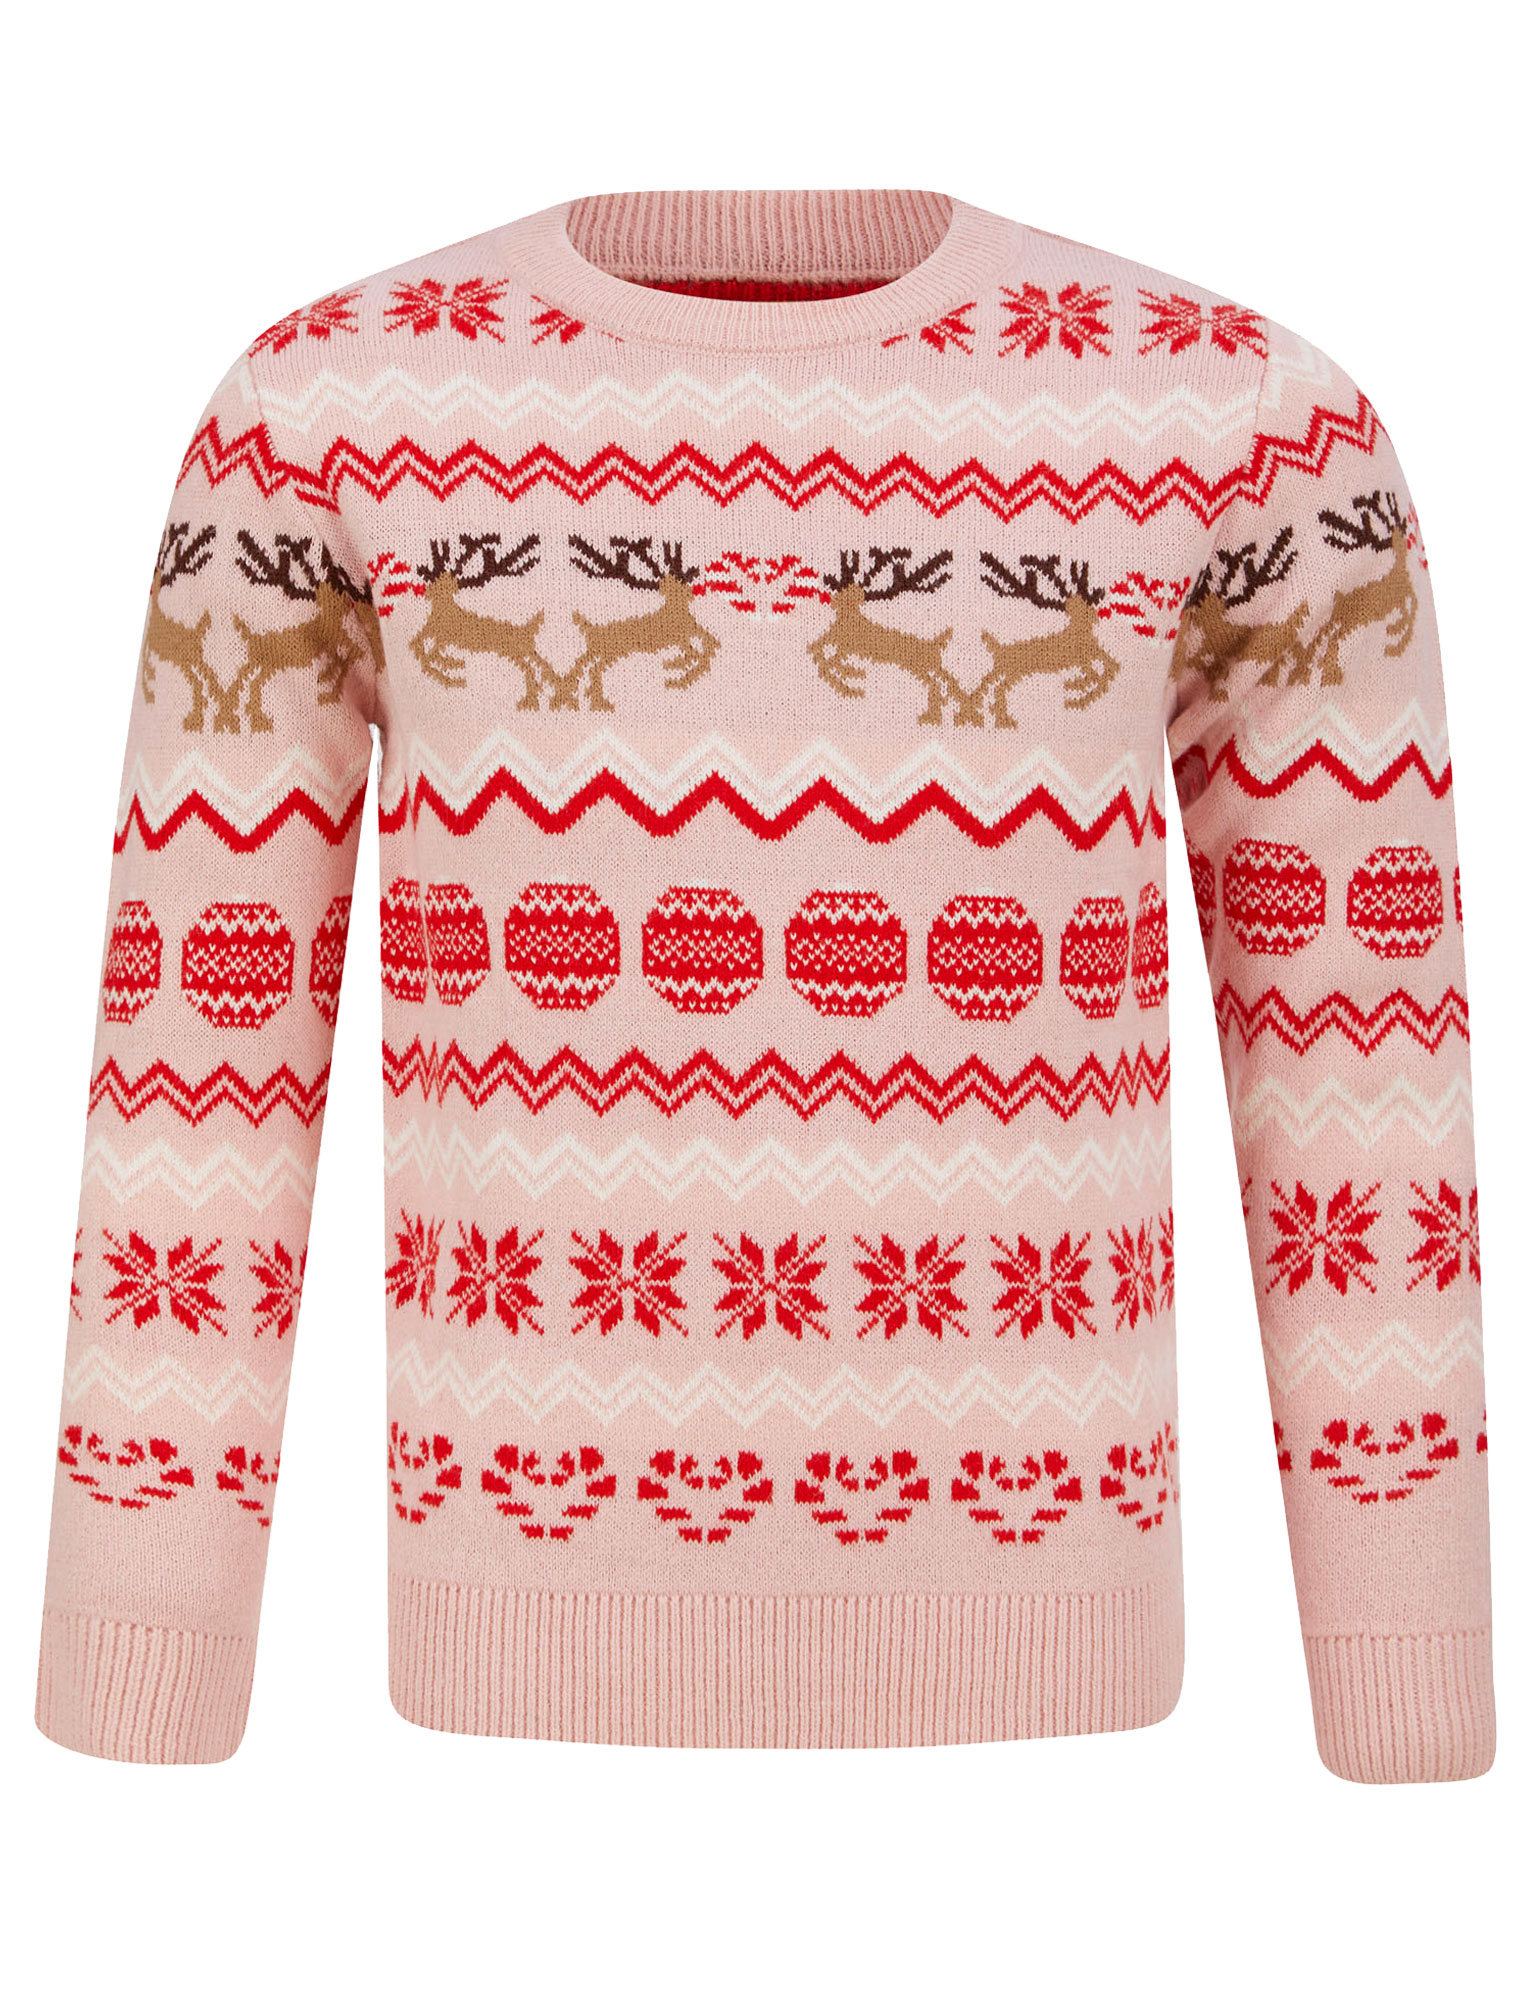 WO_ XMAS MENS CHRISTMAS SWEATER VINTAGE PULLOVER JUMPER SNOWFLAKE KNITTED TOP ST 